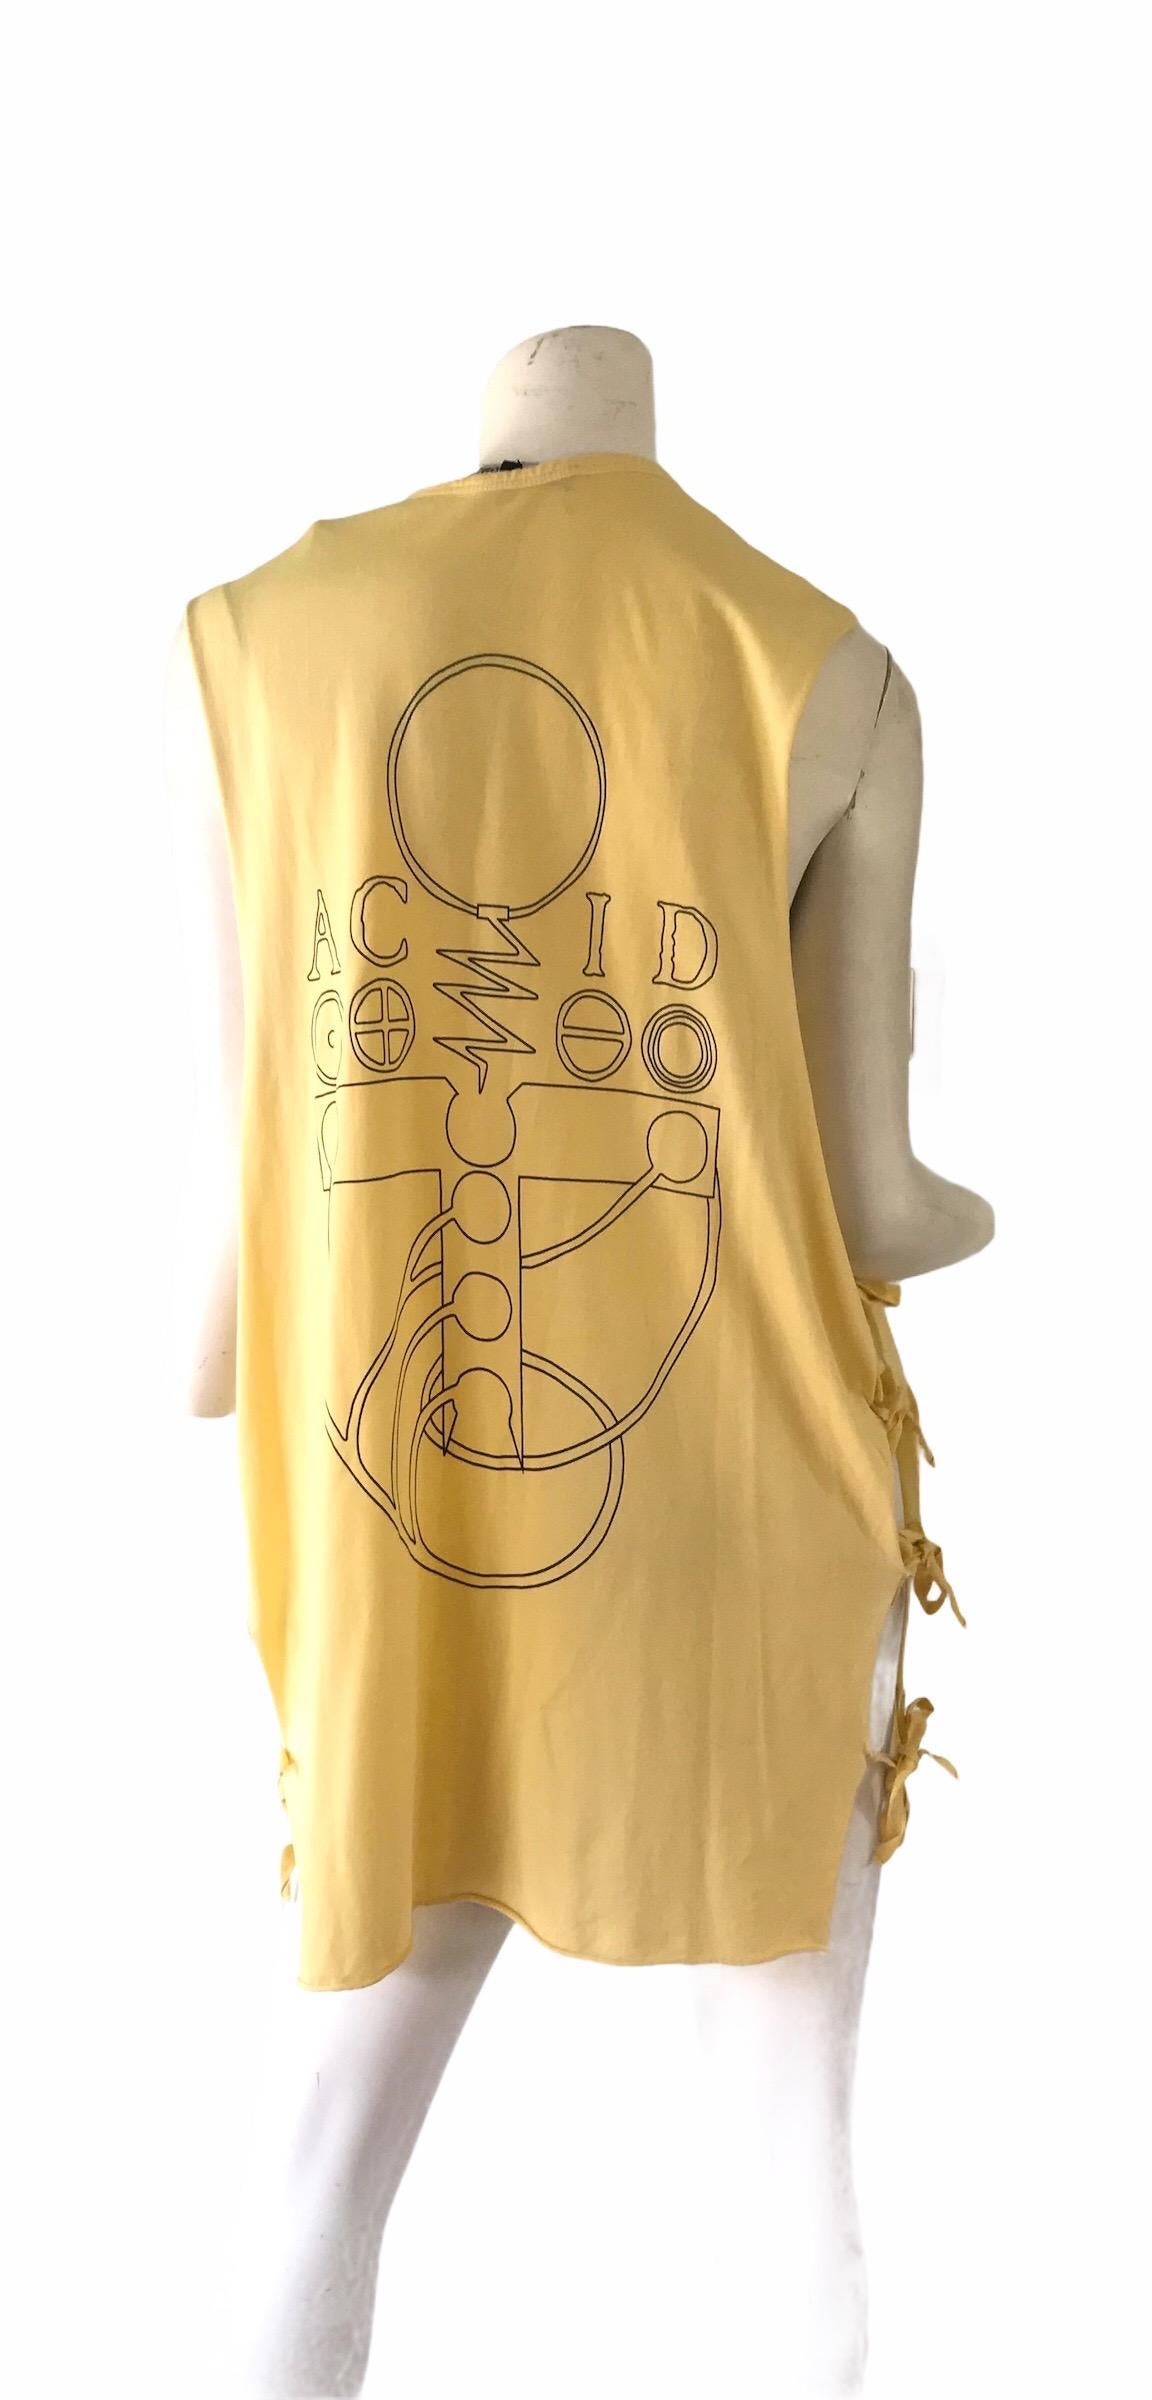 2004 Raf Simons yellow cotton acid tee tank with tie sides. sz L / Condition: Excellent. 